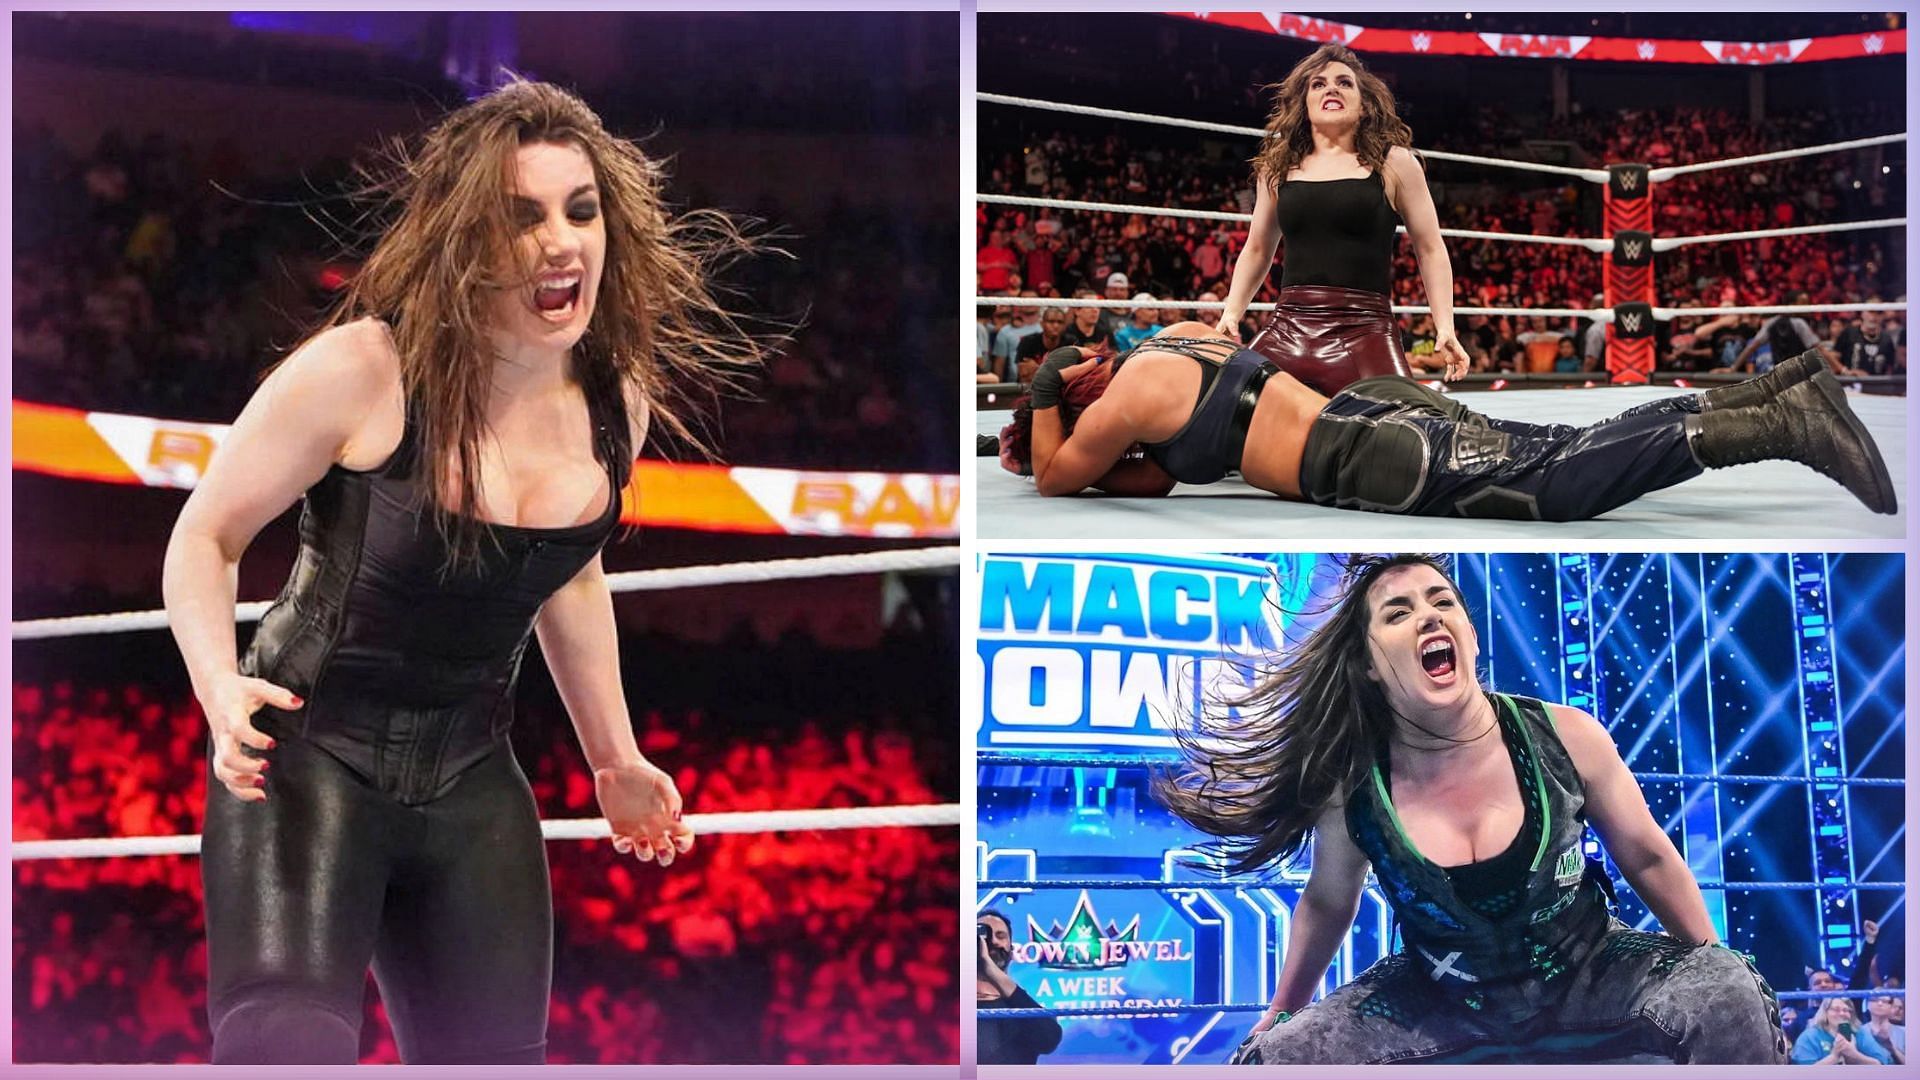 WWE Superstar Nikki Cross has been stalking fellow superstar Candice LeRae and fans have been musing why.